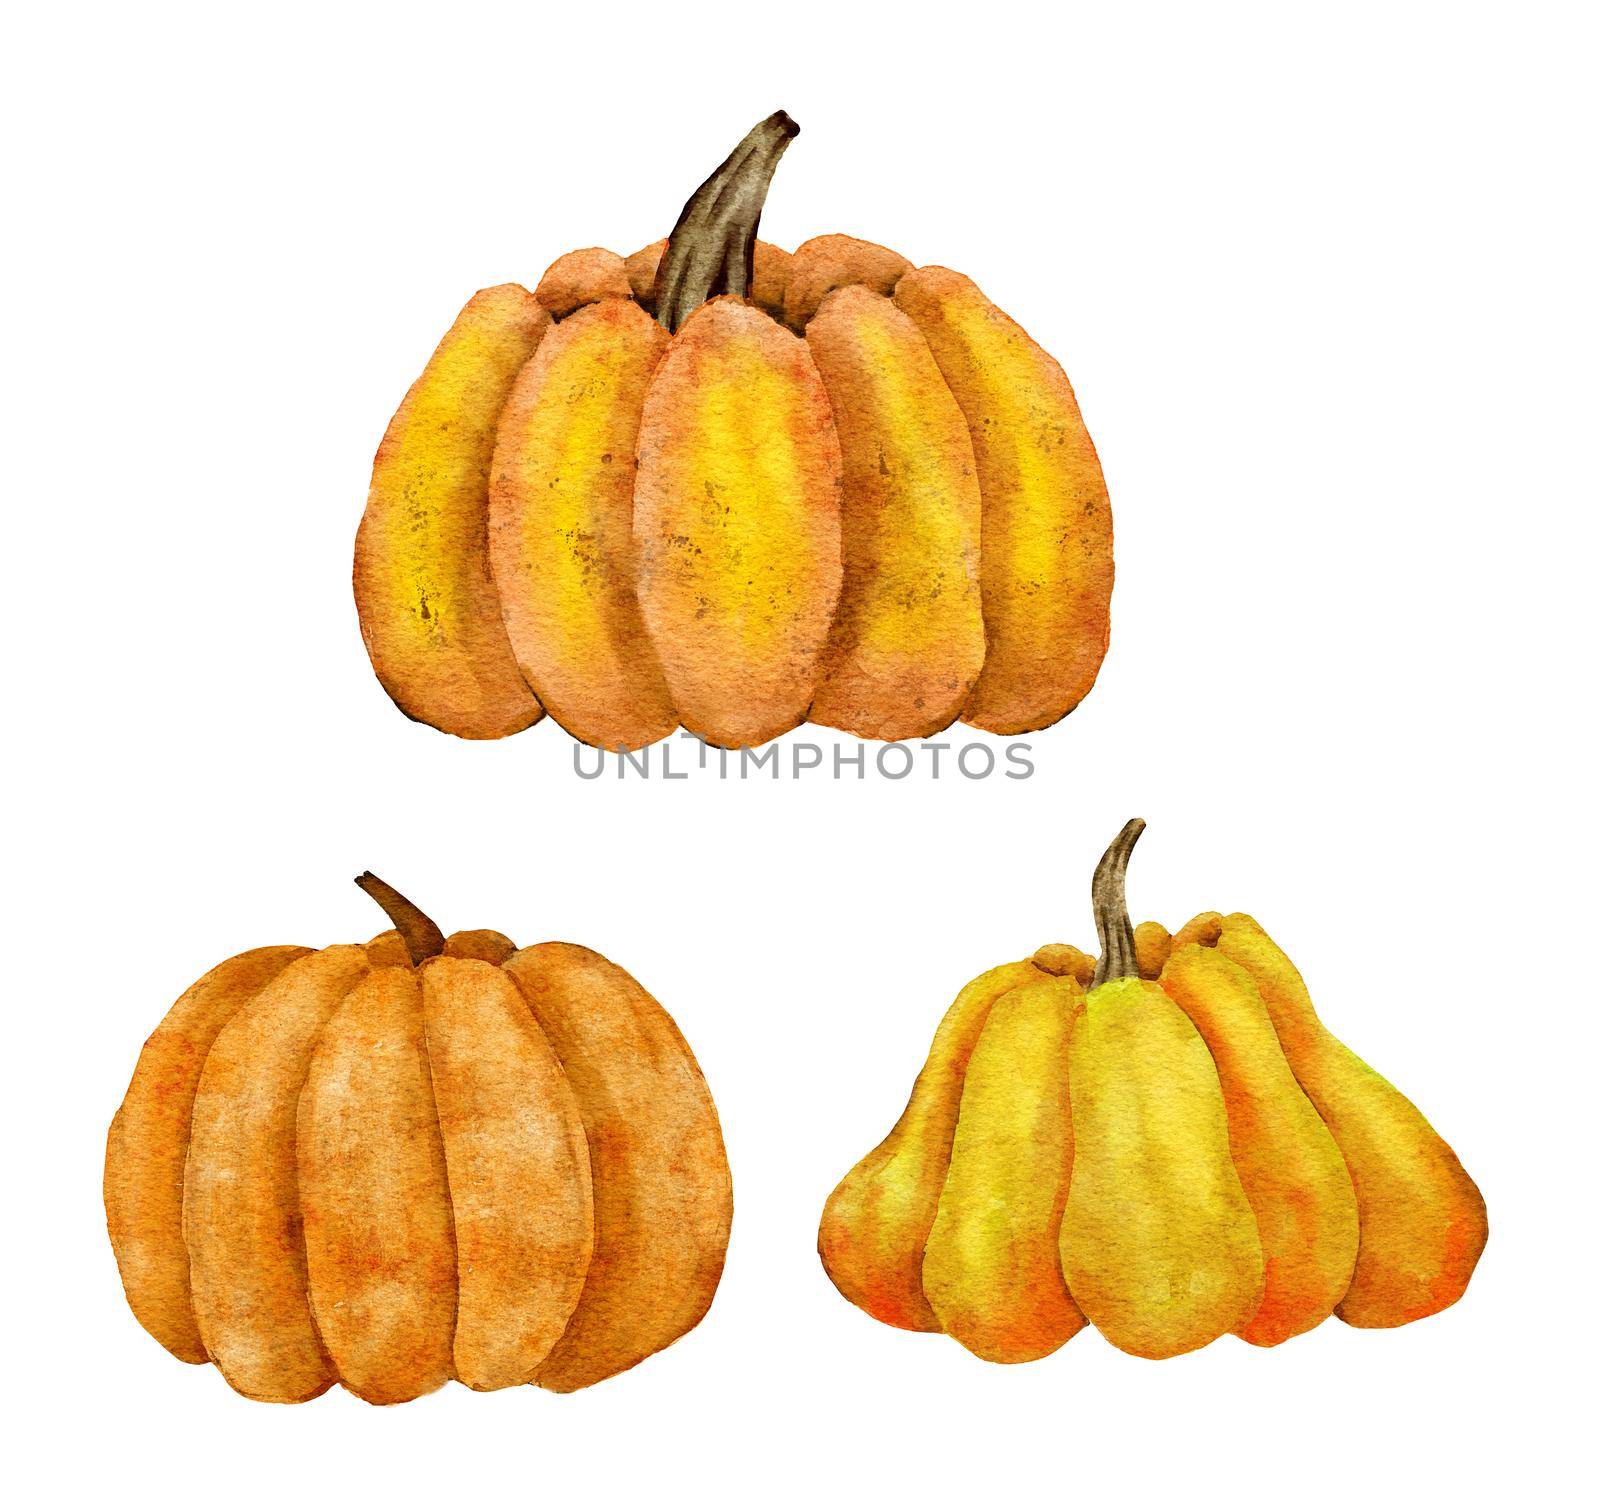 Watercolor hand drawn illustrations of orange yellow pumpkins, fall autumn organic food vegetable. Thanksgiving Halloween clipart for party invitation celebration decor